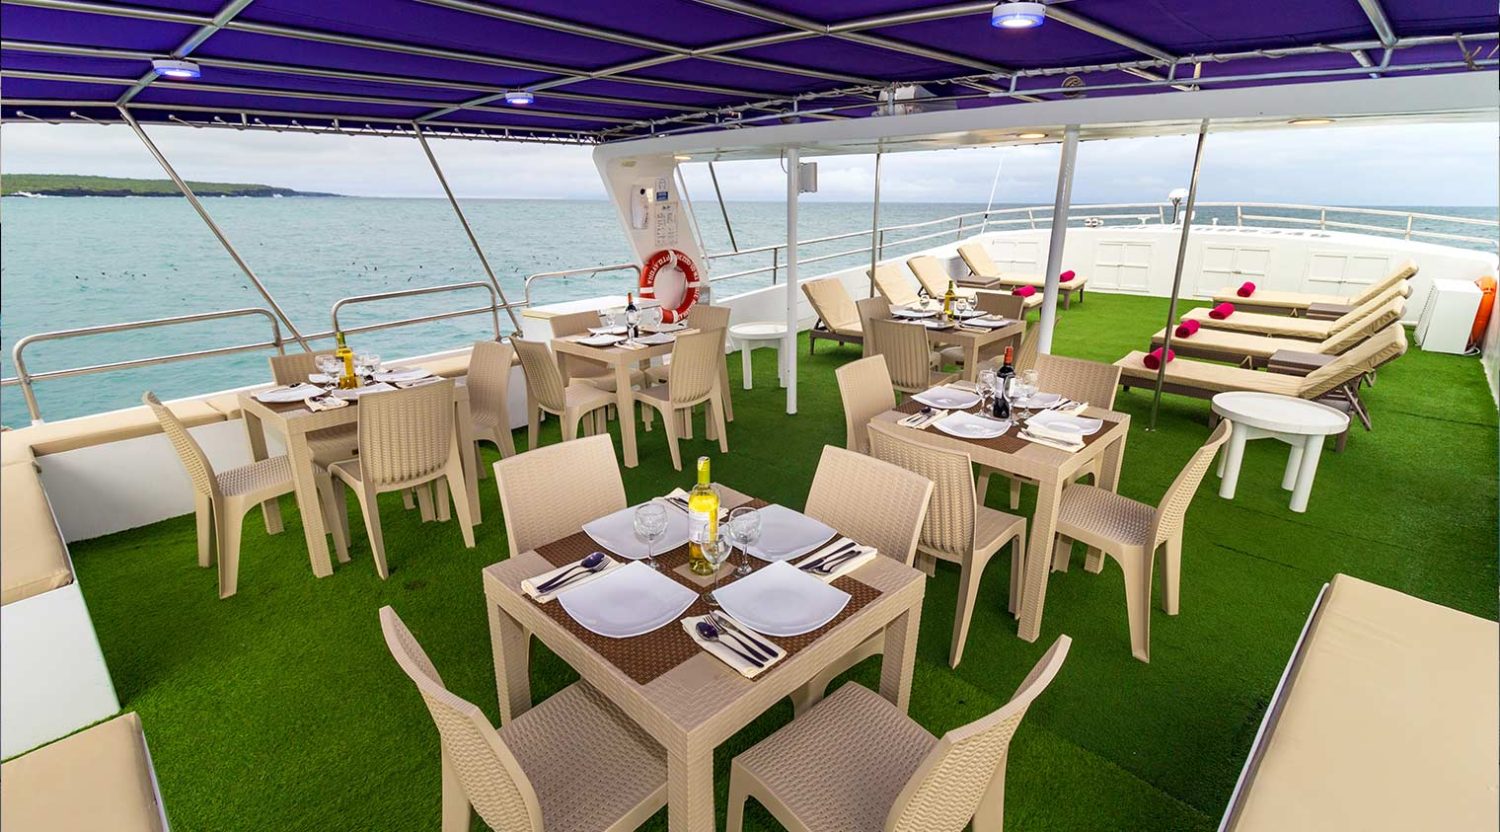 outdoor dining room of monserrat yacht of galapagos islands